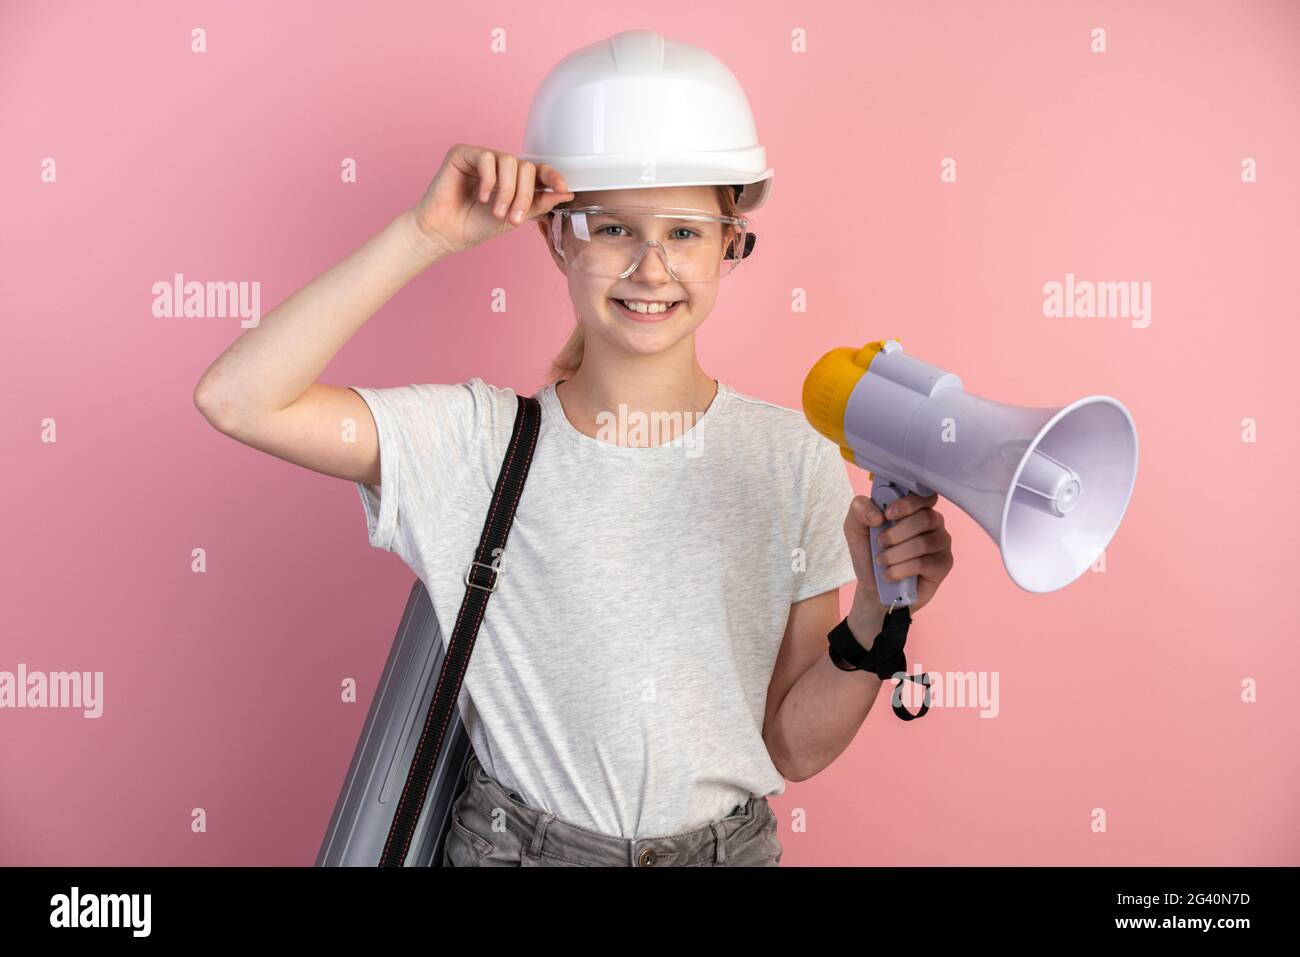 Young engineer is a girl on a background of a pink wall, she is wearing a helmet, glasses and a loudspeaker in her hands. Construction concept. Stock Photo